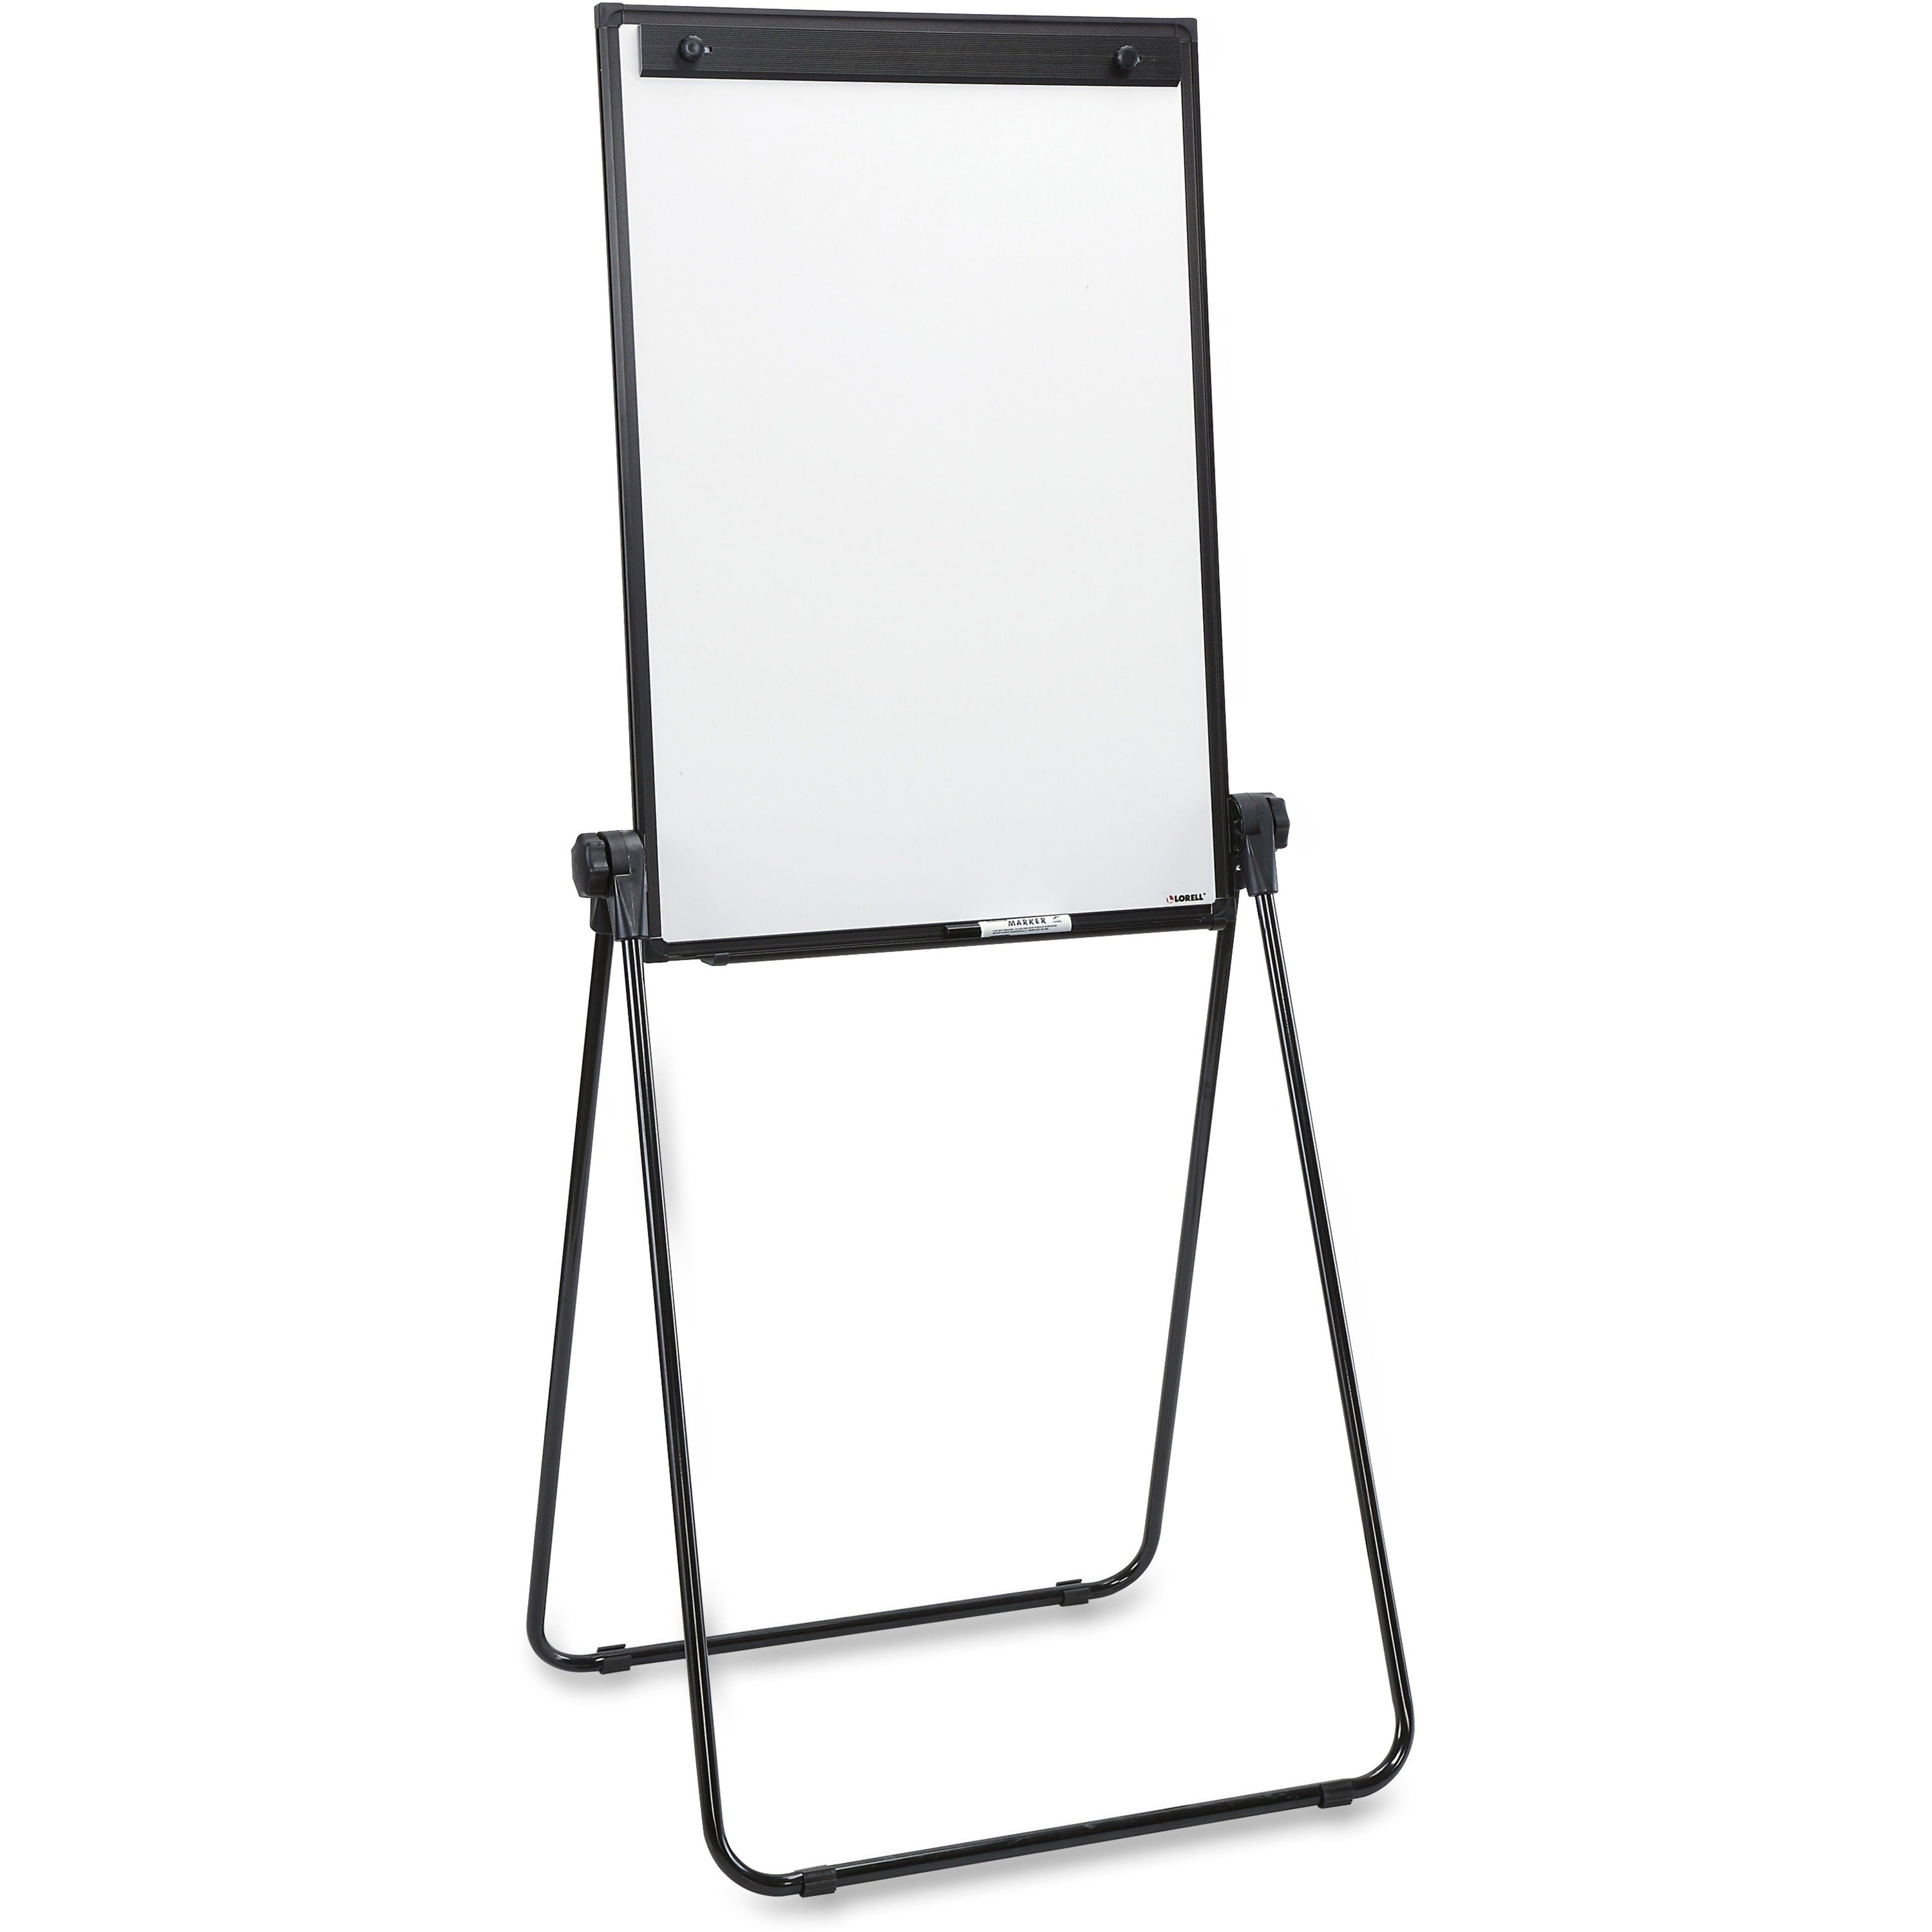 Lorell 2-sided Dry-Erase Easel with Flip-Chart Clip - 36" (3 ft) Width x 24" (2 ft) Height - Melamine Surface - Black Steel Frame - Rectangle - 1 Each - 